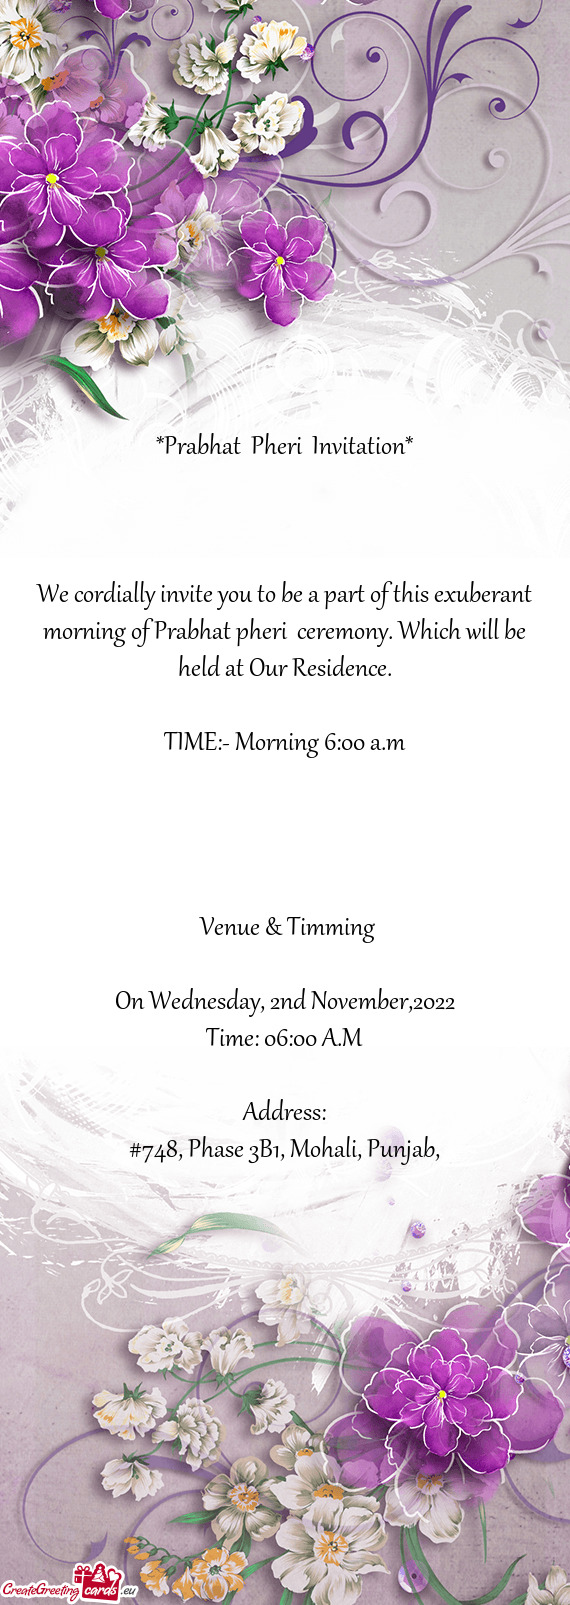 We cordially invite you to be a part of this exuberant morning of Prabhat pheri ceremony. Which wil